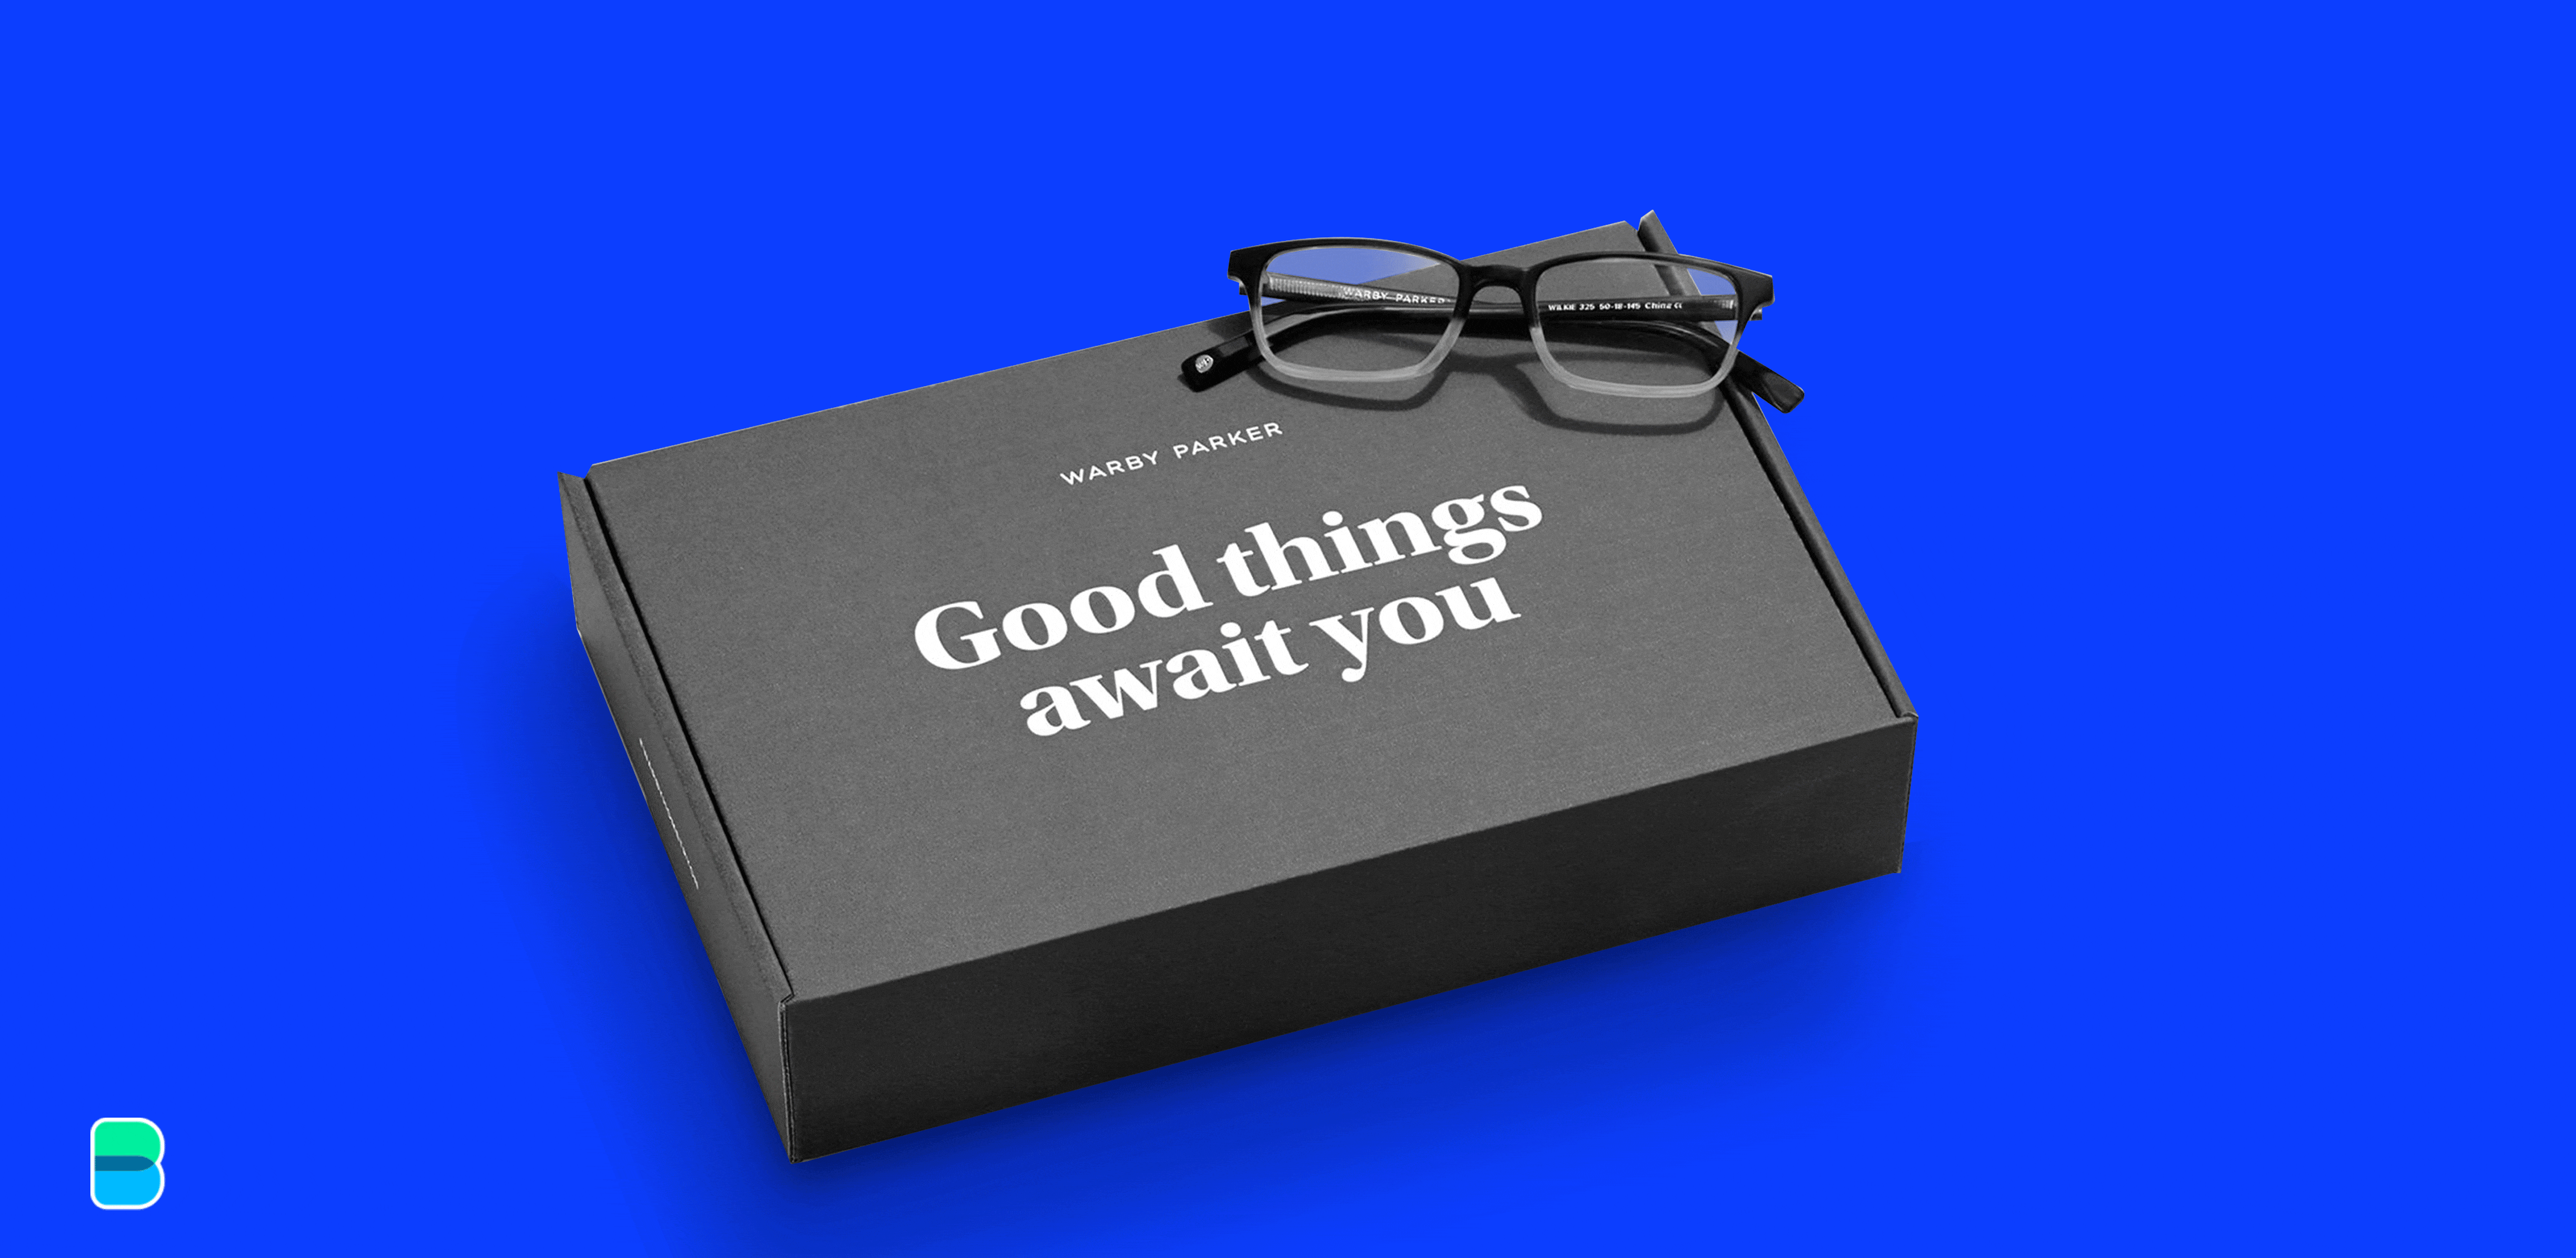 Warby Parker is now public and ready for action